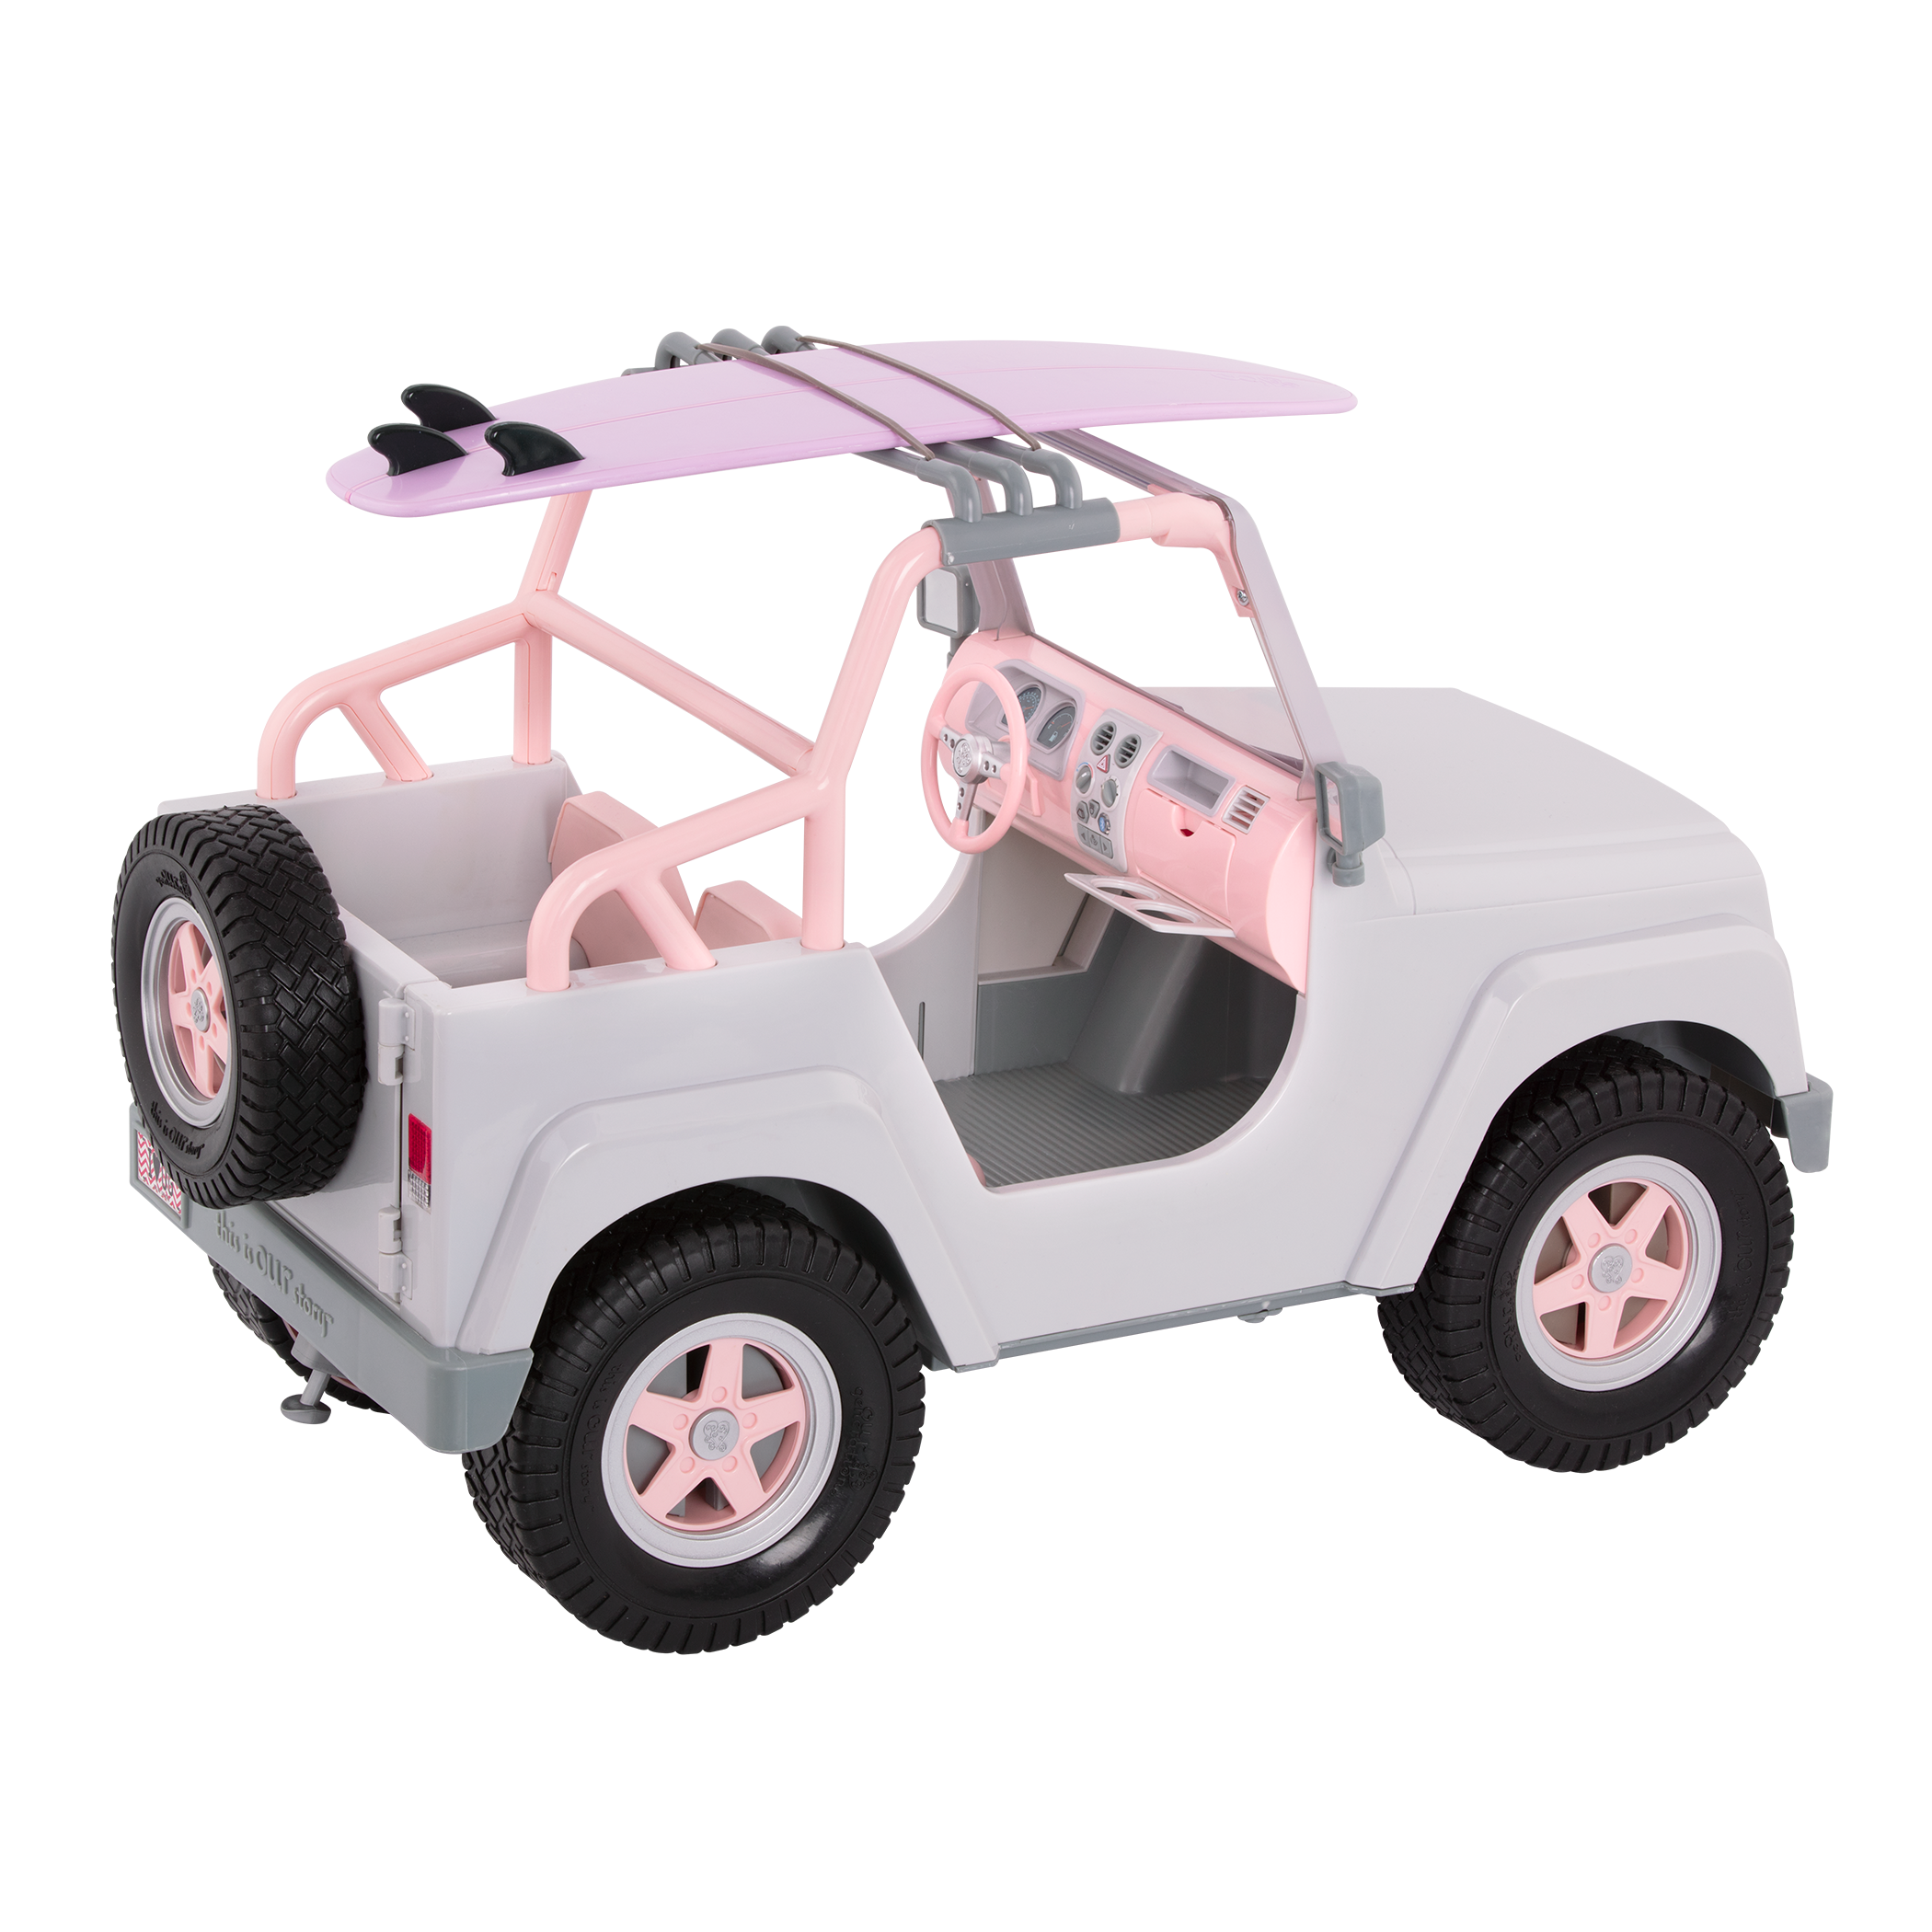 Our Generation Off Roader 4x4 Vehicle for 18-inch Dolls